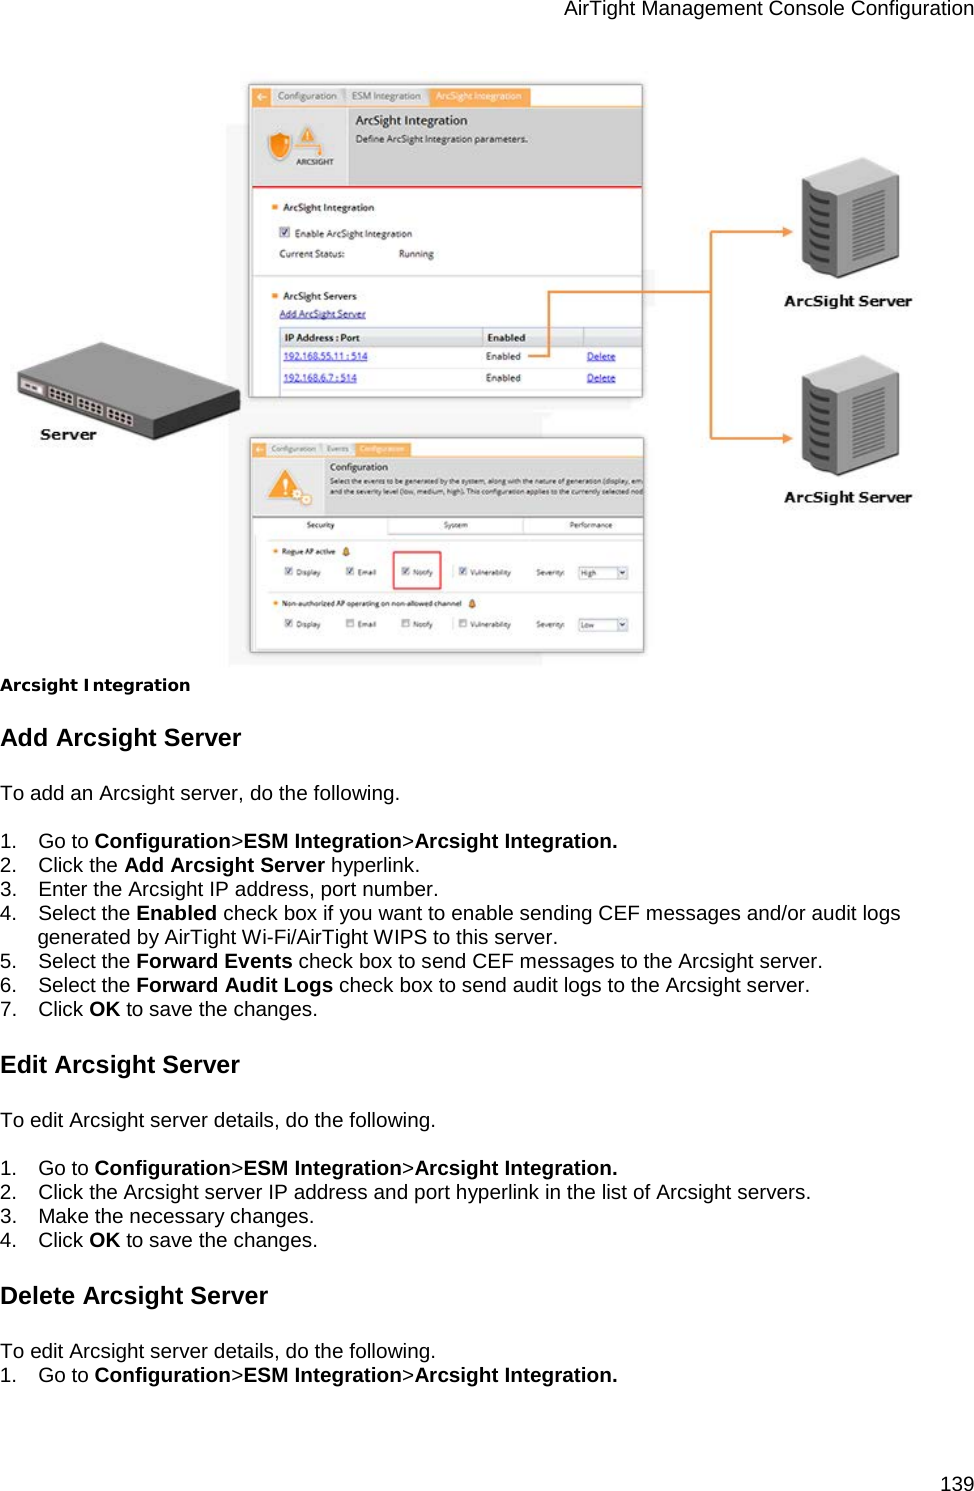 AirTight Management Console Configuration 139  Arcsight Integration Add Arcsight Server To add an Arcsight server, do the following.   1.      Go to Configuration&gt;ESM Integration&gt;Arcsight Integration. 2.      Click the Add Arcsight Server hyperlink. 3.      Enter the Arcsight IP address, port number. 4.      Select the Enabled check box if you want to enable sending CEF messages and/or audit logs generated by AirTight Wi-Fi/AirTight WIPS to this server. 5.      Select the Forward Events check box to send CEF messages to the Arcsight server. 6.      Select the Forward Audit Logs check box to send audit logs to the Arcsight server.  7.      Click OK to save the changes.  Edit Arcsight Server To edit Arcsight server details, do the following.   1.      Go to Configuration&gt;ESM Integration&gt;Arcsight Integration. 2.      Click the Arcsight server IP address and port hyperlink in the list of Arcsight servers. 3.      Make the necessary changes. 4.      Click OK to save the changes. Delete Arcsight Server To edit Arcsight server details, do the following. 1.      Go to Configuration&gt;ESM Integration&gt;Arcsight Integration. 